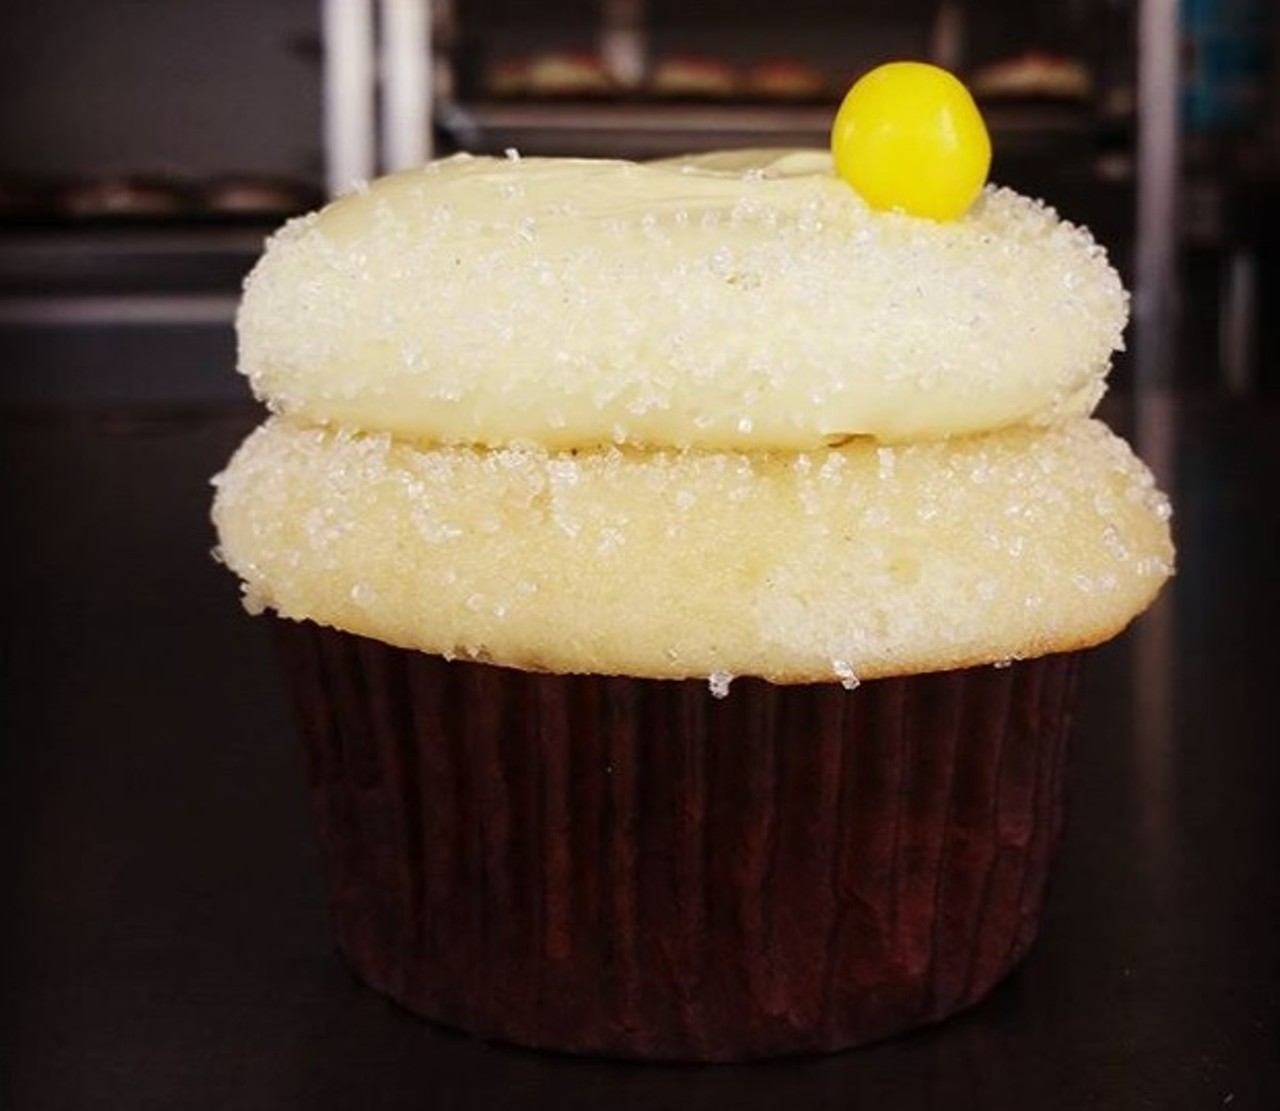 These are no ordinary cupcakes. When you visit Sarah's Cake Stop, you get to choose from fun flavors such as salted caramel, vanilla cr&egrave;me brulee and lemon cream (pictured). Photo courtesy of Instagram / sarahscakestop.